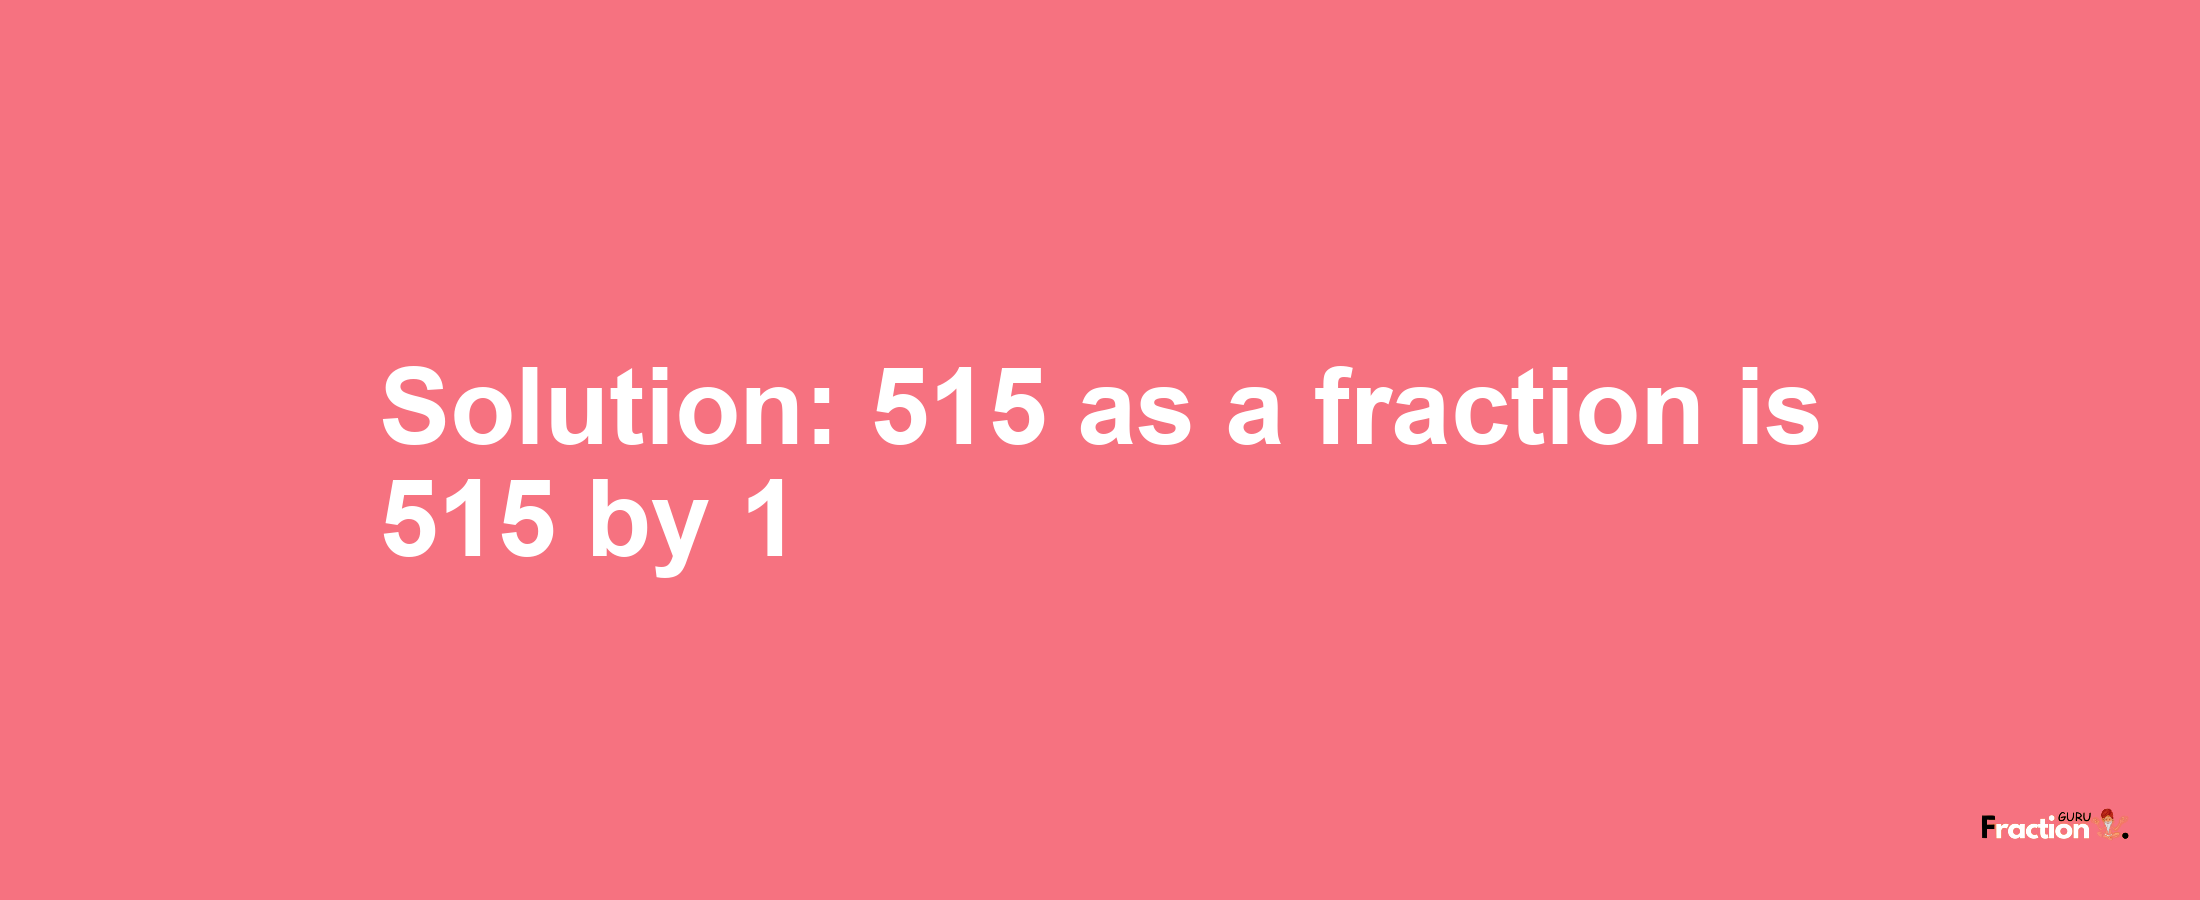 Solution:515 as a fraction is 515/1